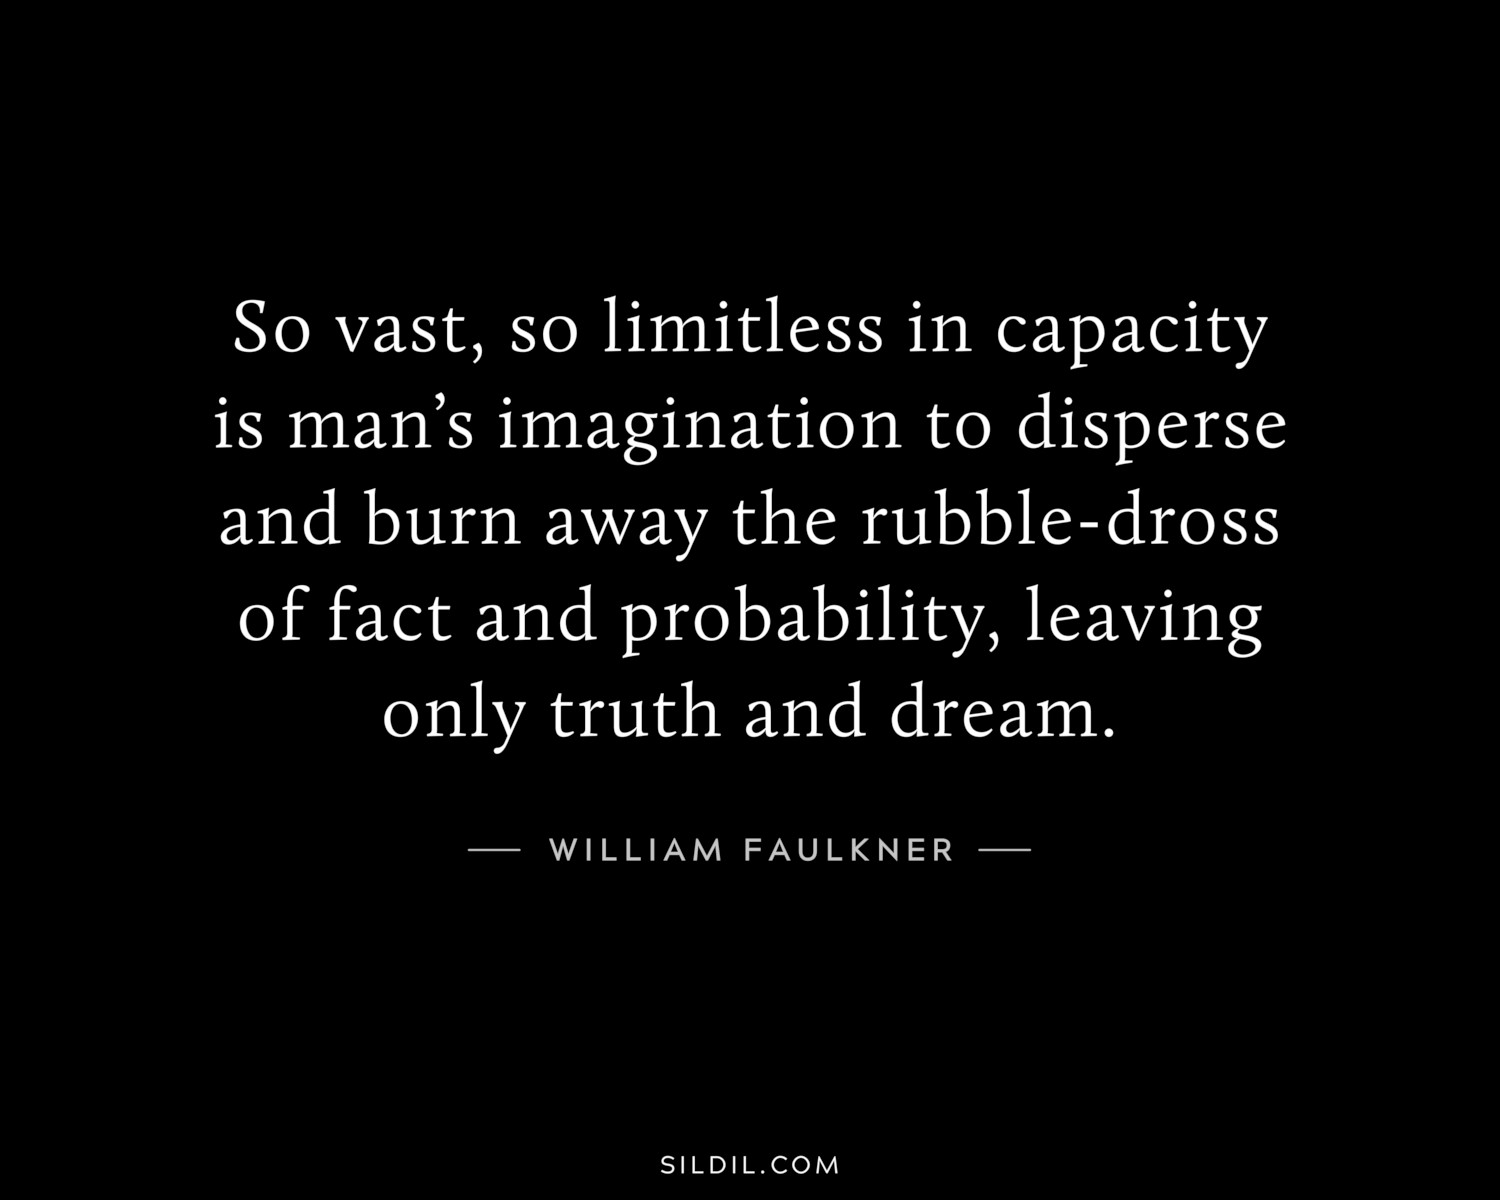 So vast, so limitless in capacity is man’s imagination to disperse and burn away the rubble-dross of fact and probability, leaving only truth and dream.